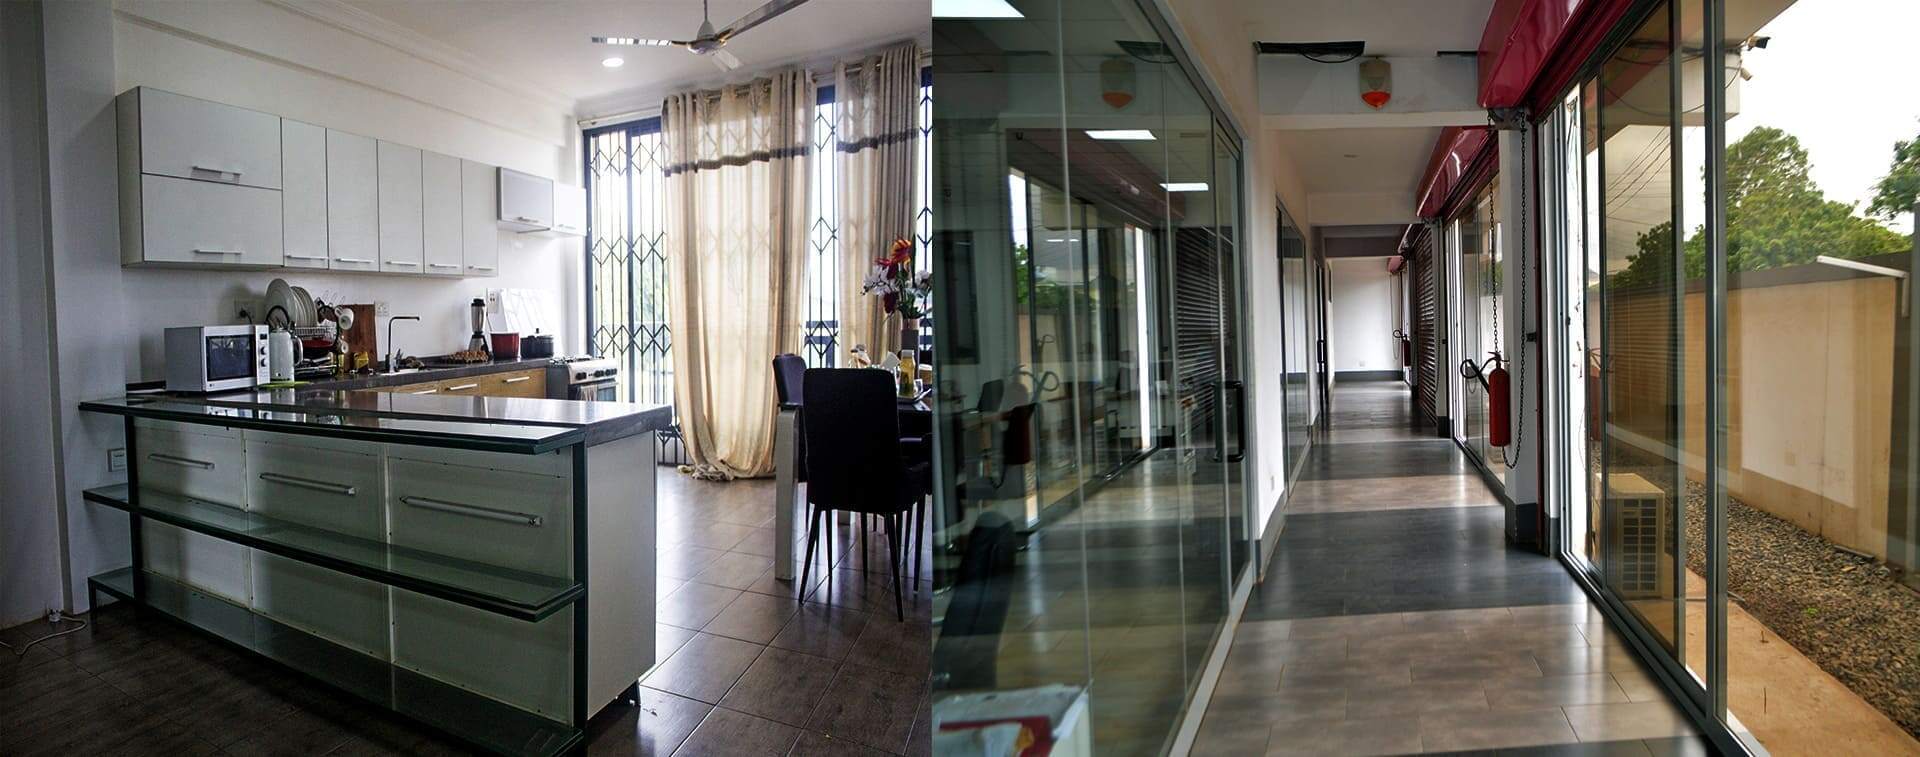 building-finishes - sliding doors, glass windows and kitchen cabinets images